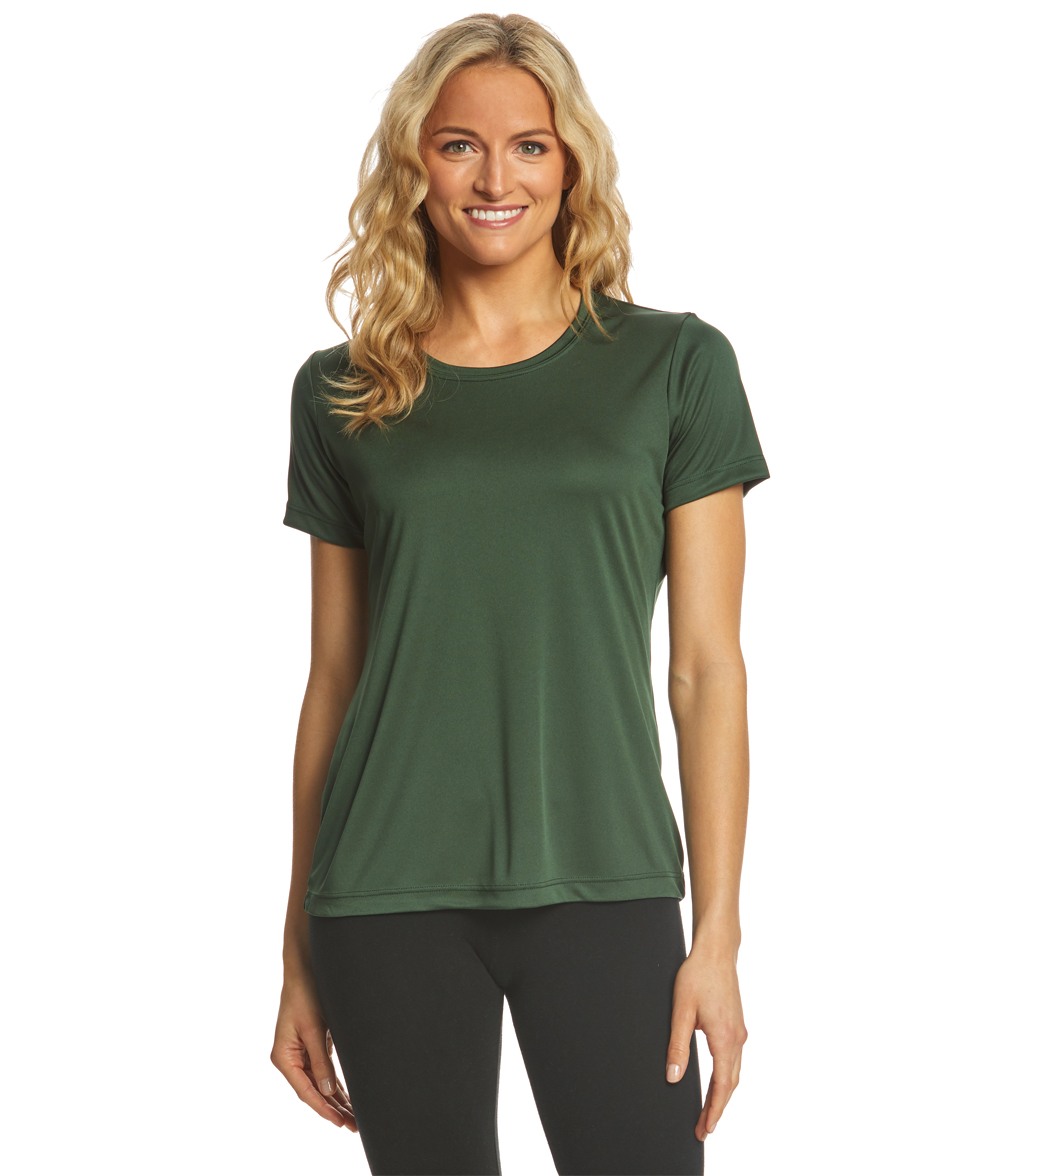 Women's Posicharge Competitortm Tee Shirt - Forest Green Large Polyester - Swimoutlet.com